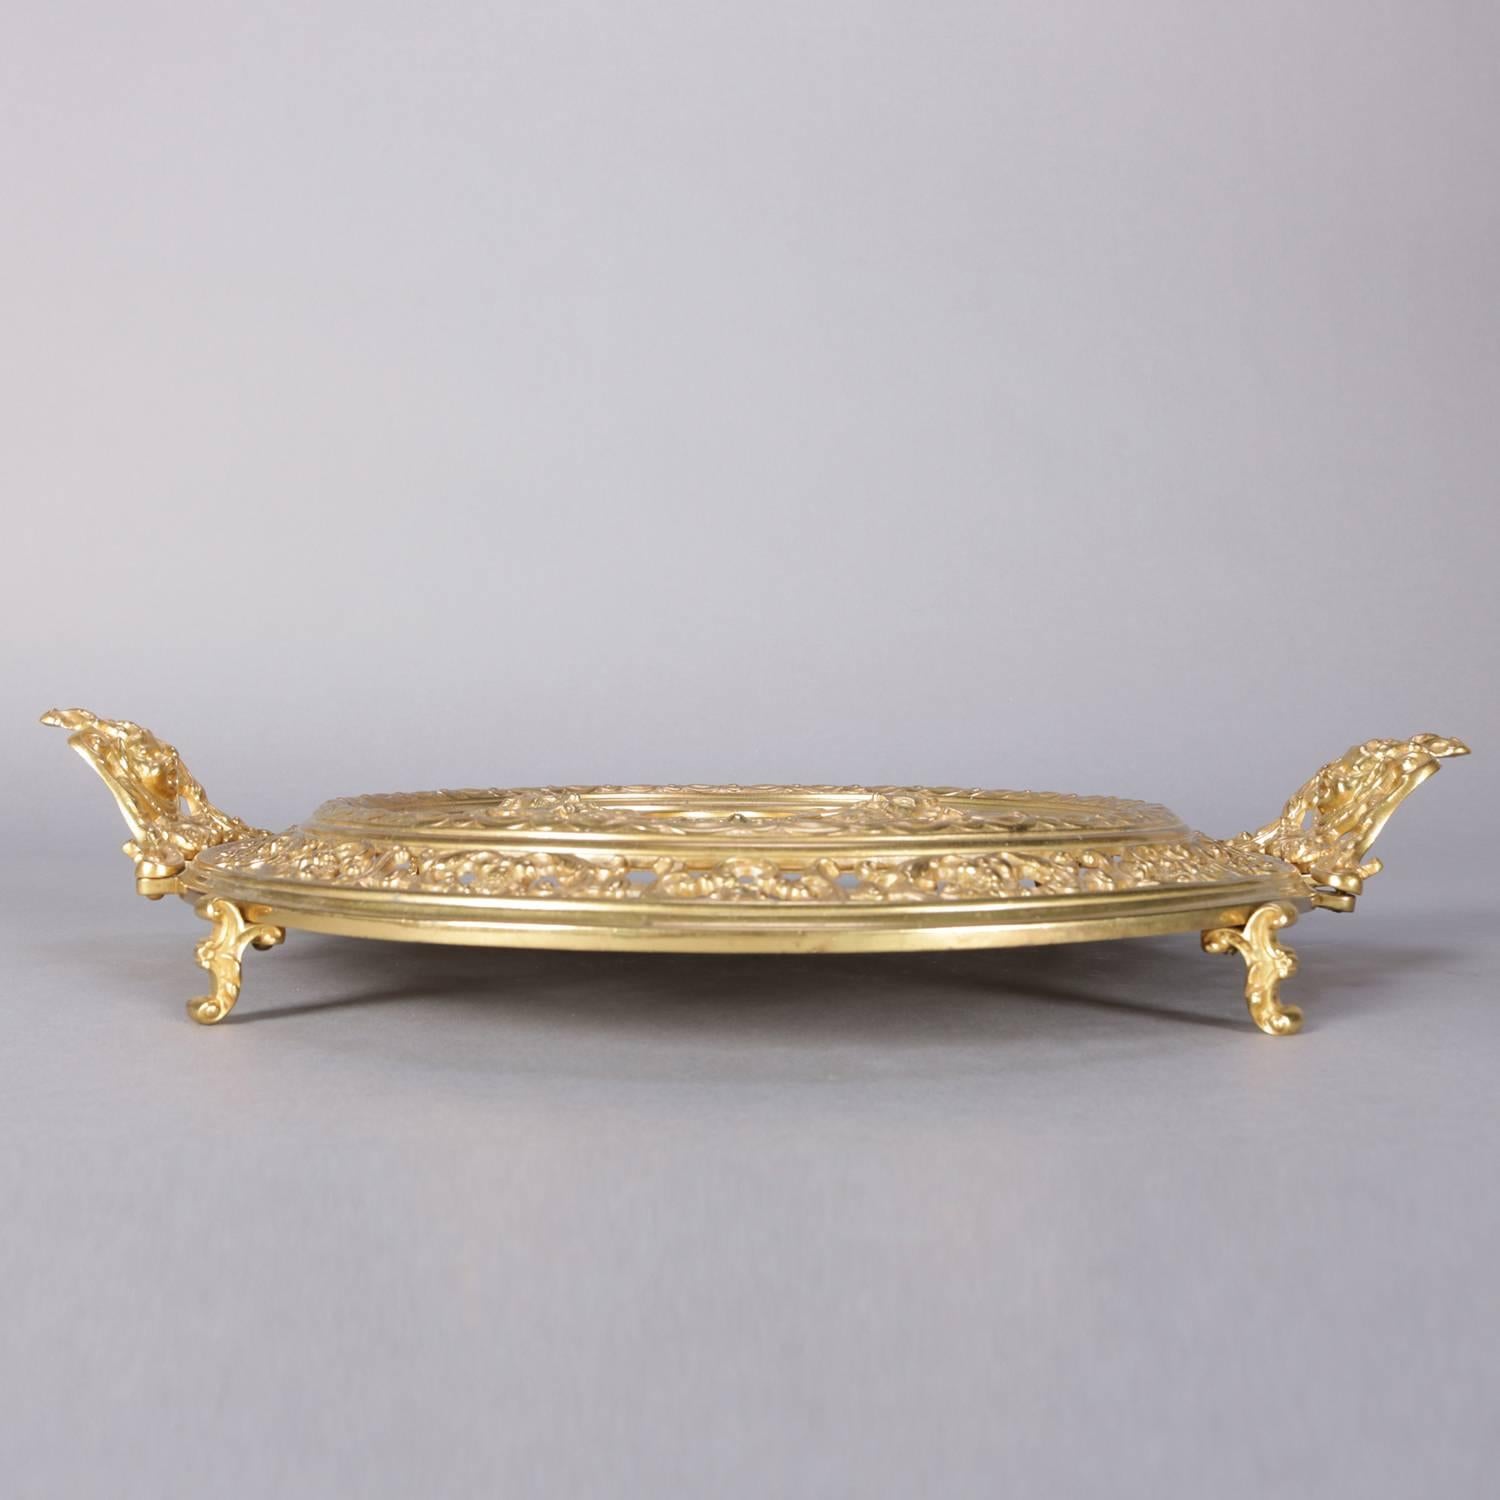 Oversized Gilt Bronze French Baroque Style Satyr Goblet Serving Tray 1